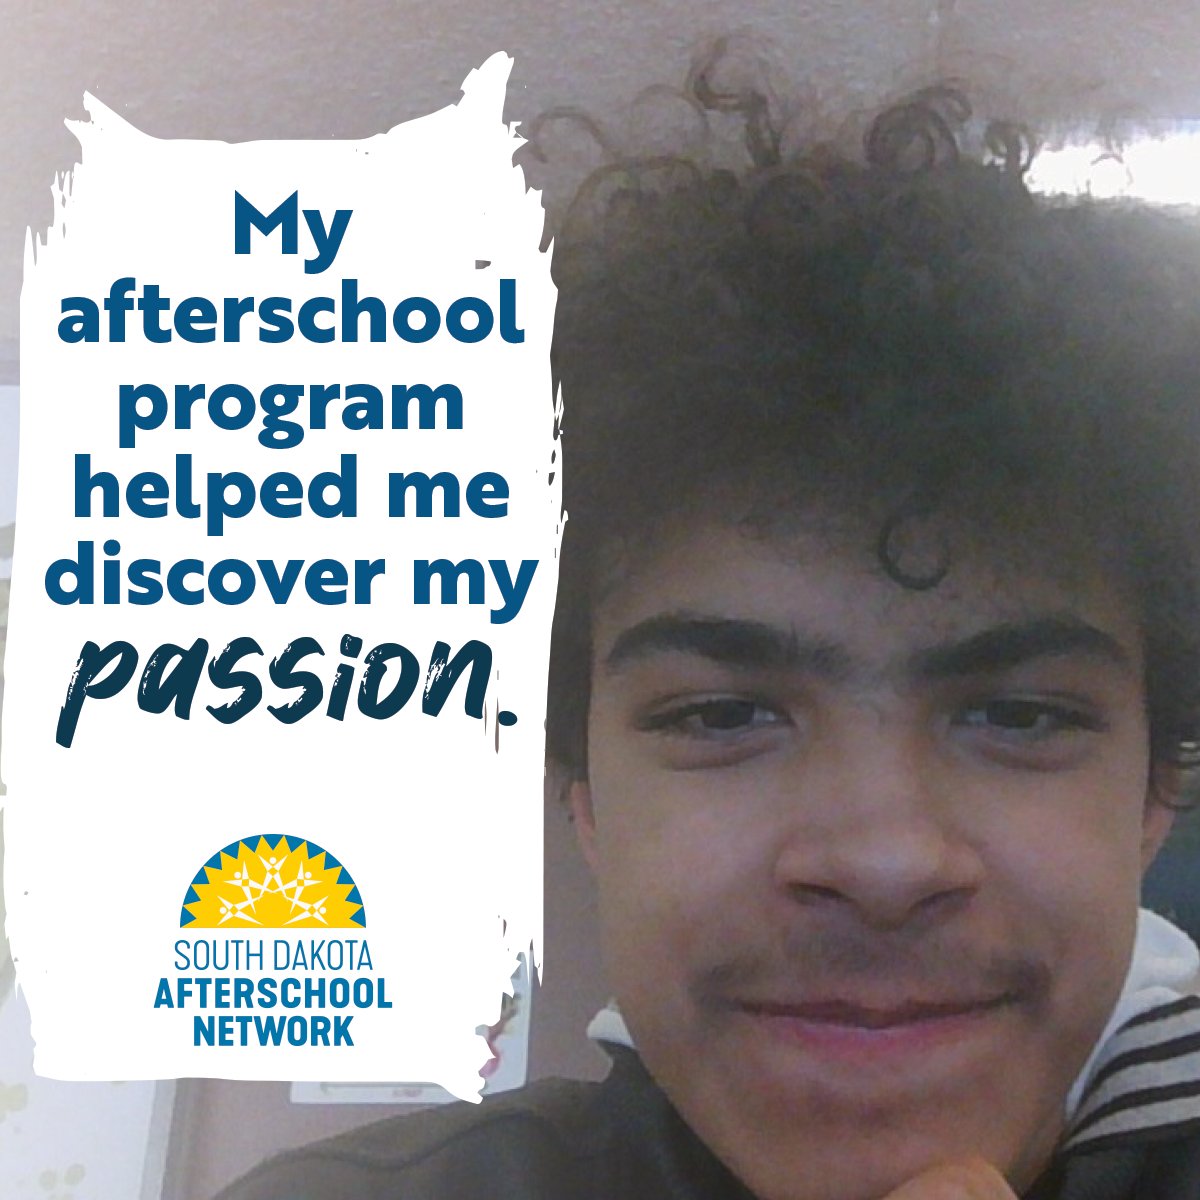 #YOUTHVOICEWEEK Jaymel, from the Rapid City Discovery program, participated in our #YouthEntrepreneur program and took home the win for his music production idea. It was at his afterschool program that led to him uncovering the activities he's passionate about. #AfterschoolWorks